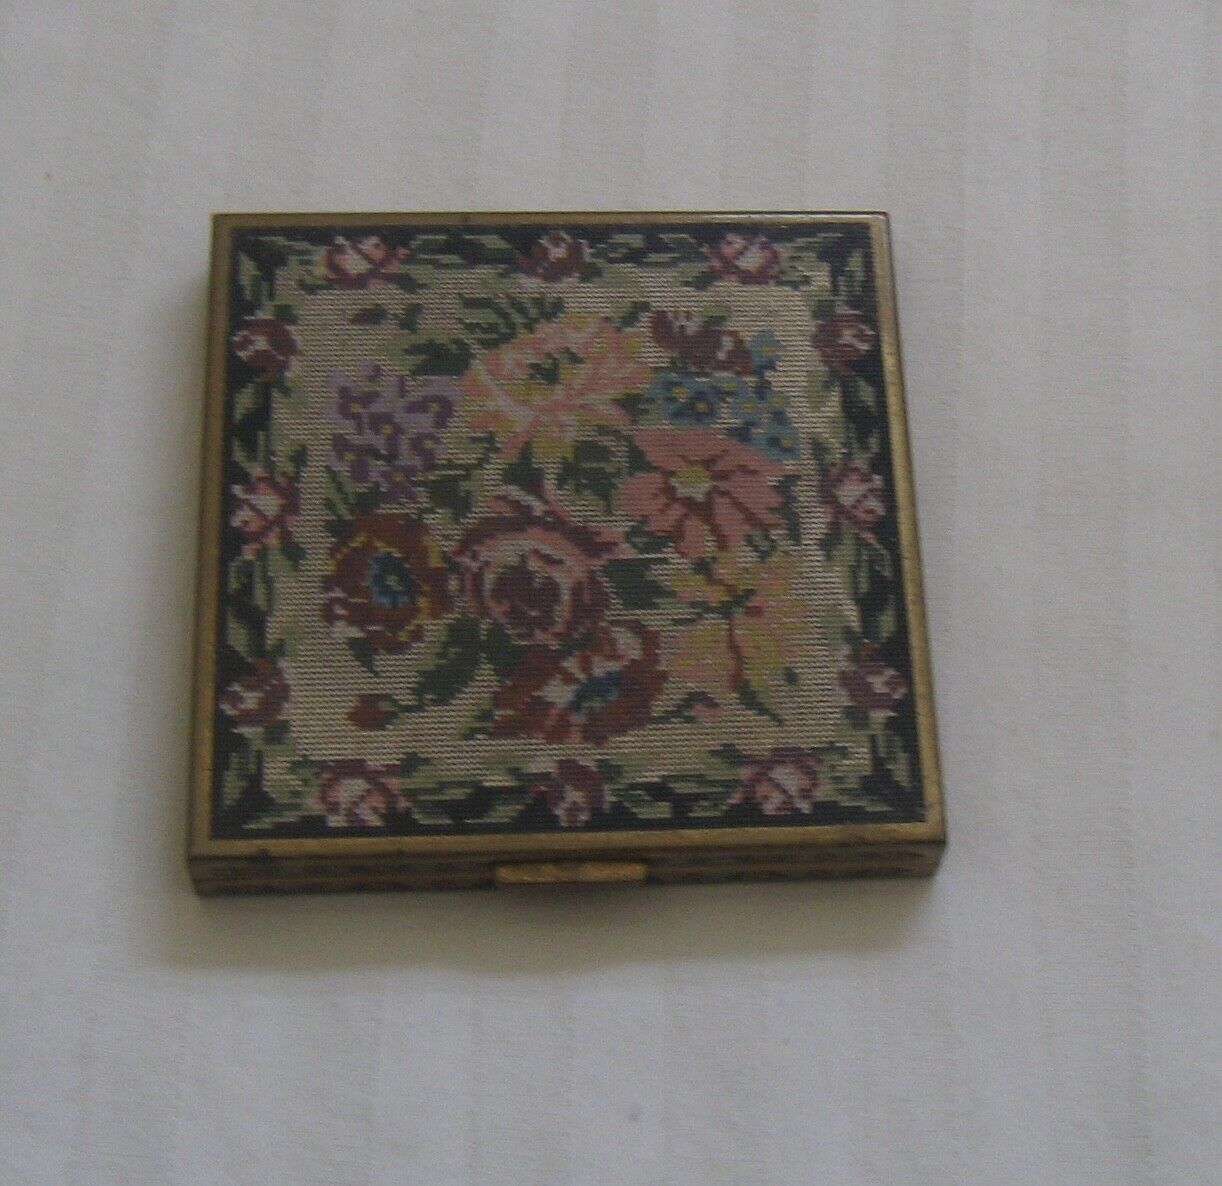 VINTAGE 1ST ½ 20TH C “VOLUPTE” COMPACT LITHOGRAPHED TAPESTRY PATTERN OF ROSES IN